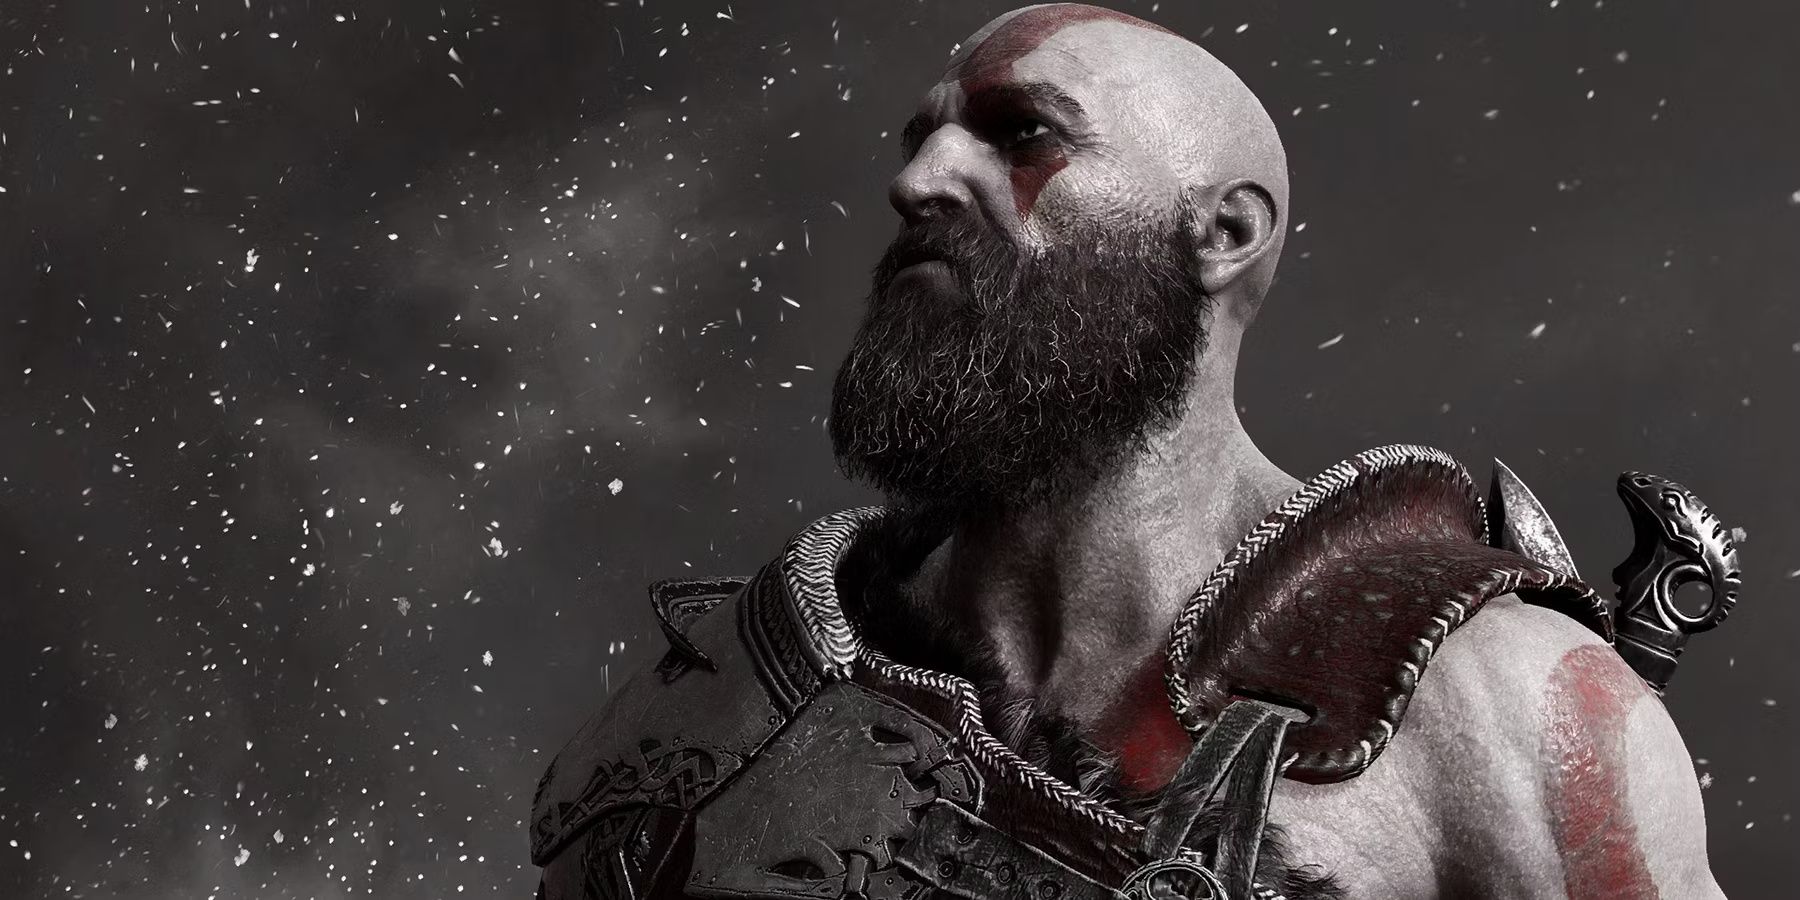 How Many Times Has Kratos Died in God of War?